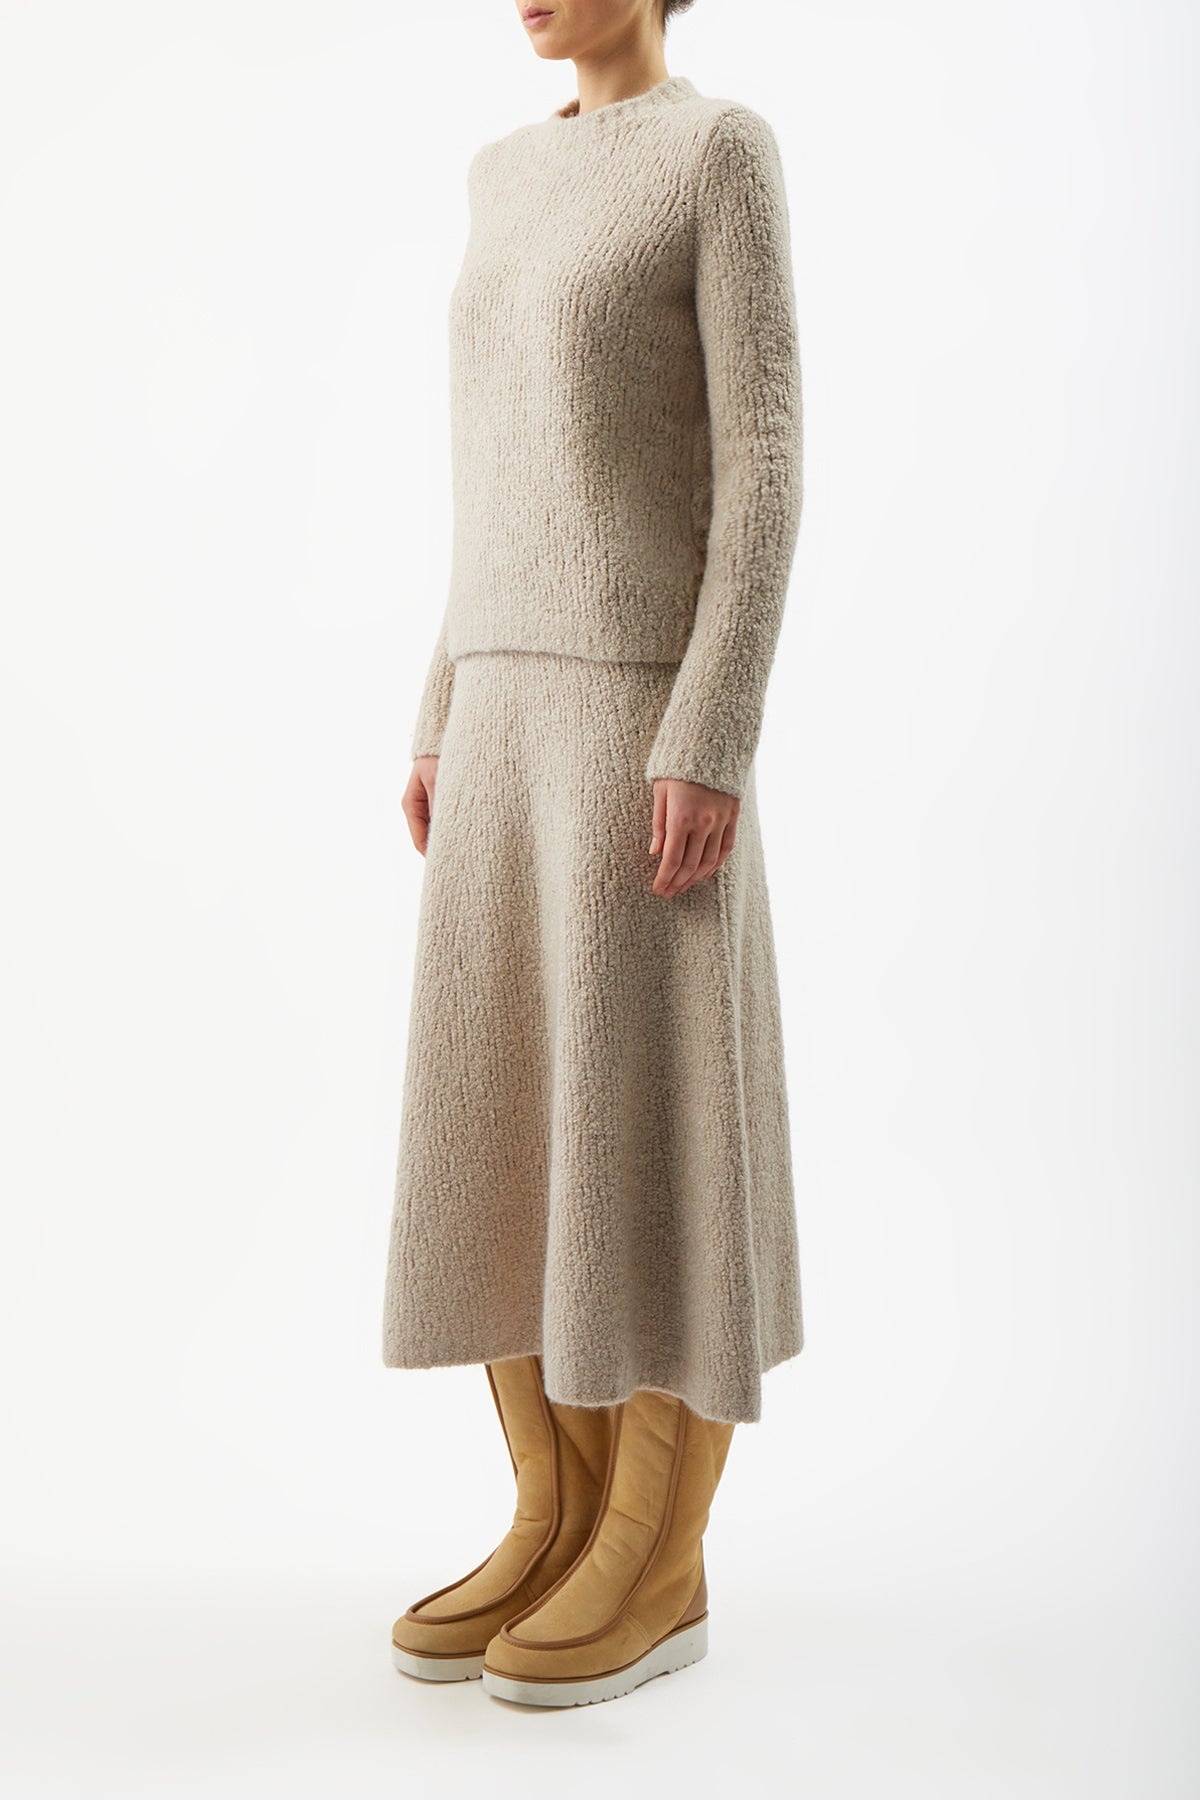 Pablo Skirt in Cashmere Boucle - 3